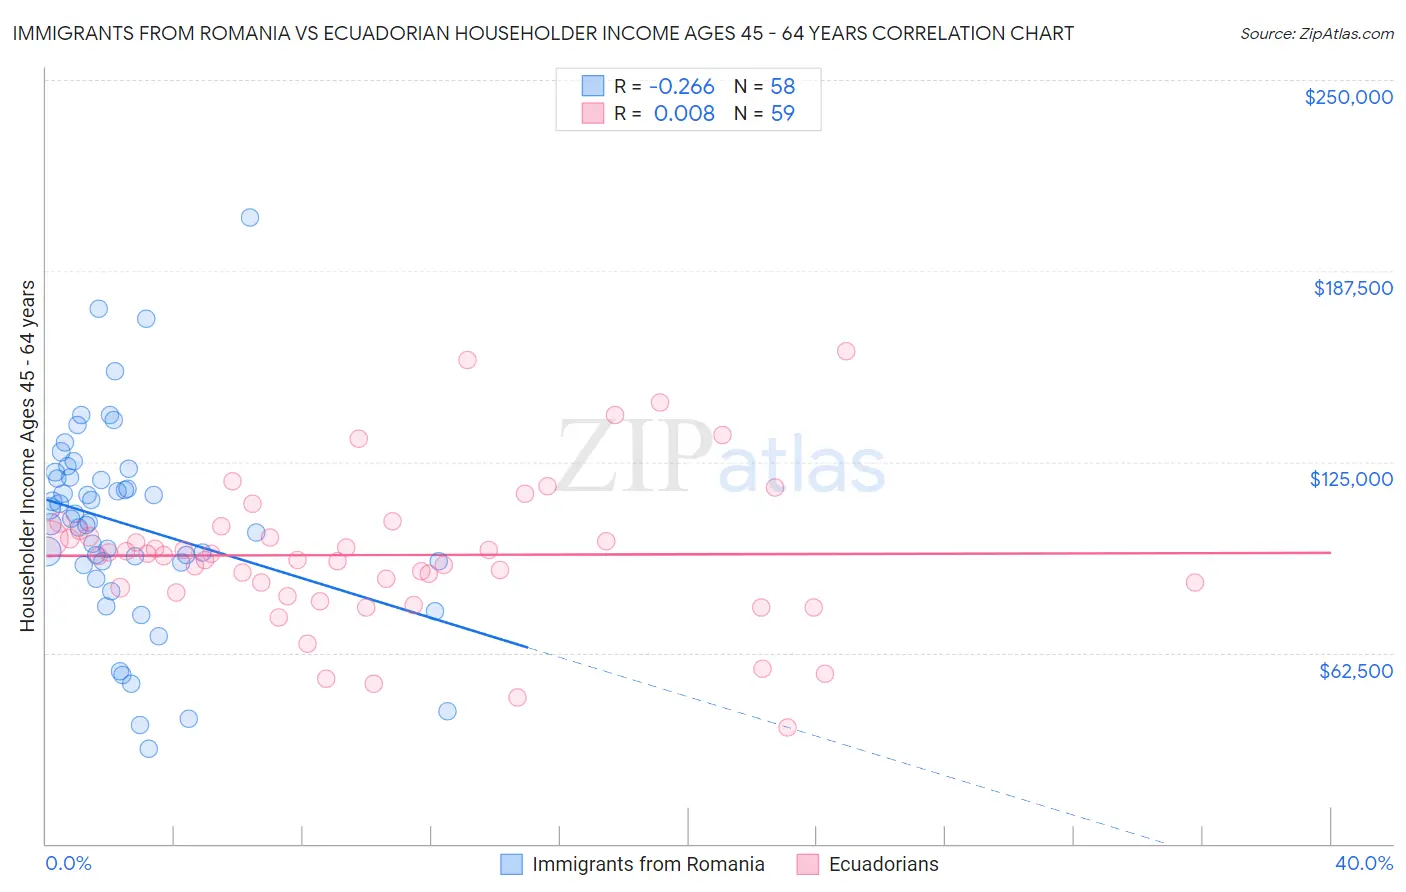 Immigrants from Romania vs Ecuadorian Householder Income Ages 45 - 64 years